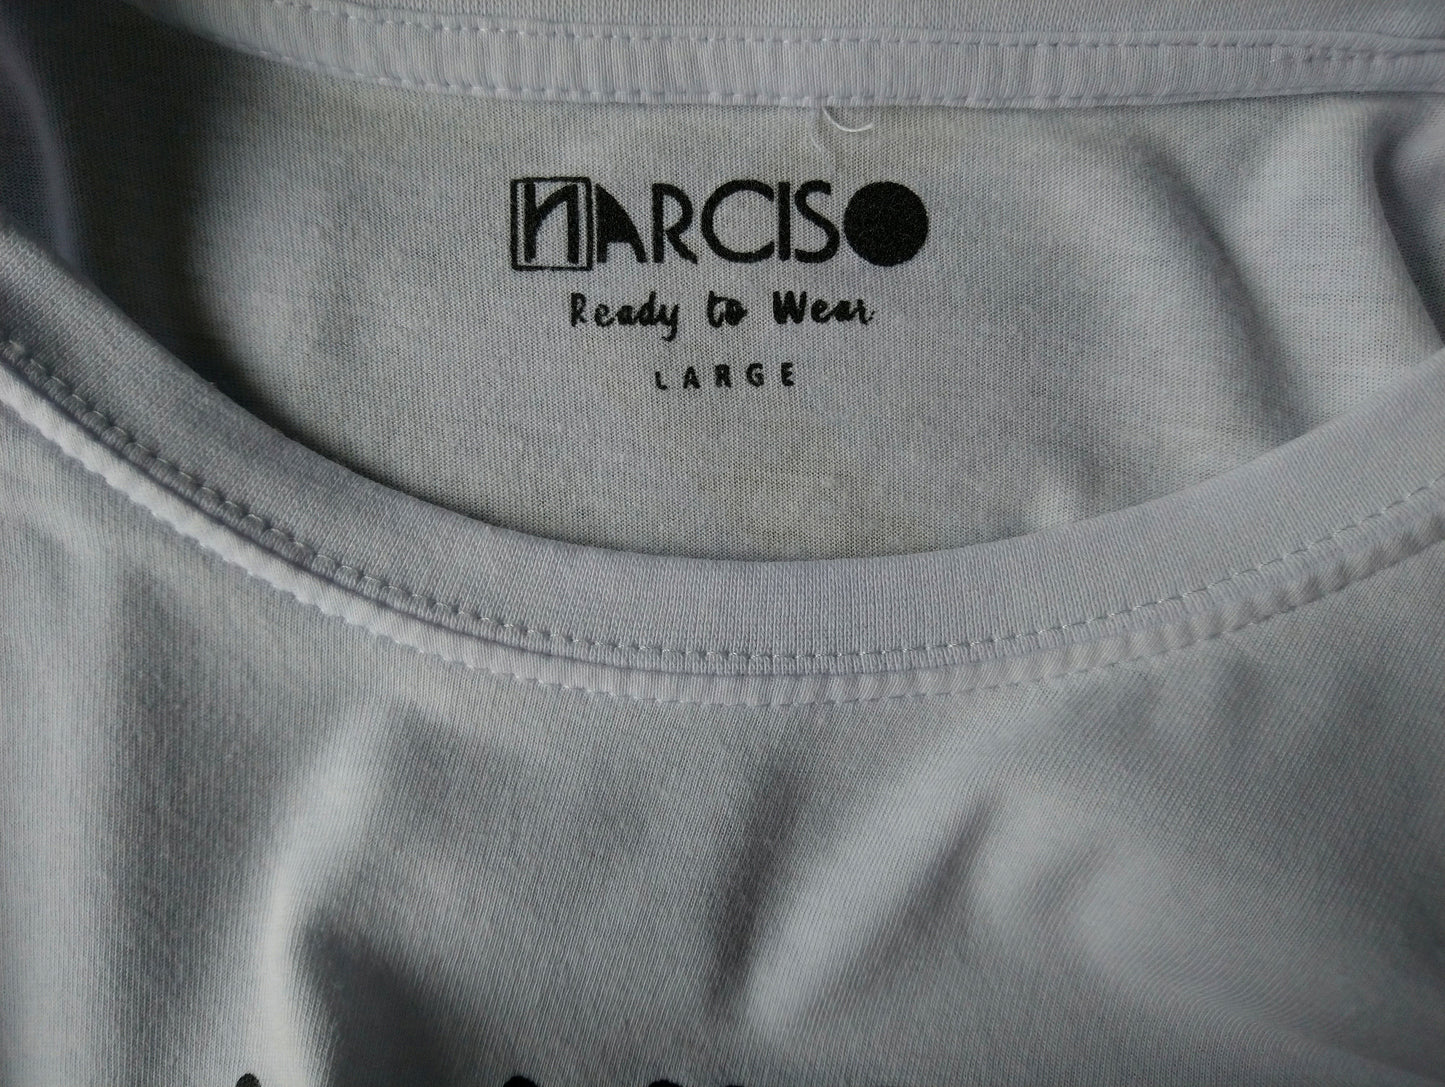 Narciso ready to wear shirt. Wit met opdruk. Maat L.